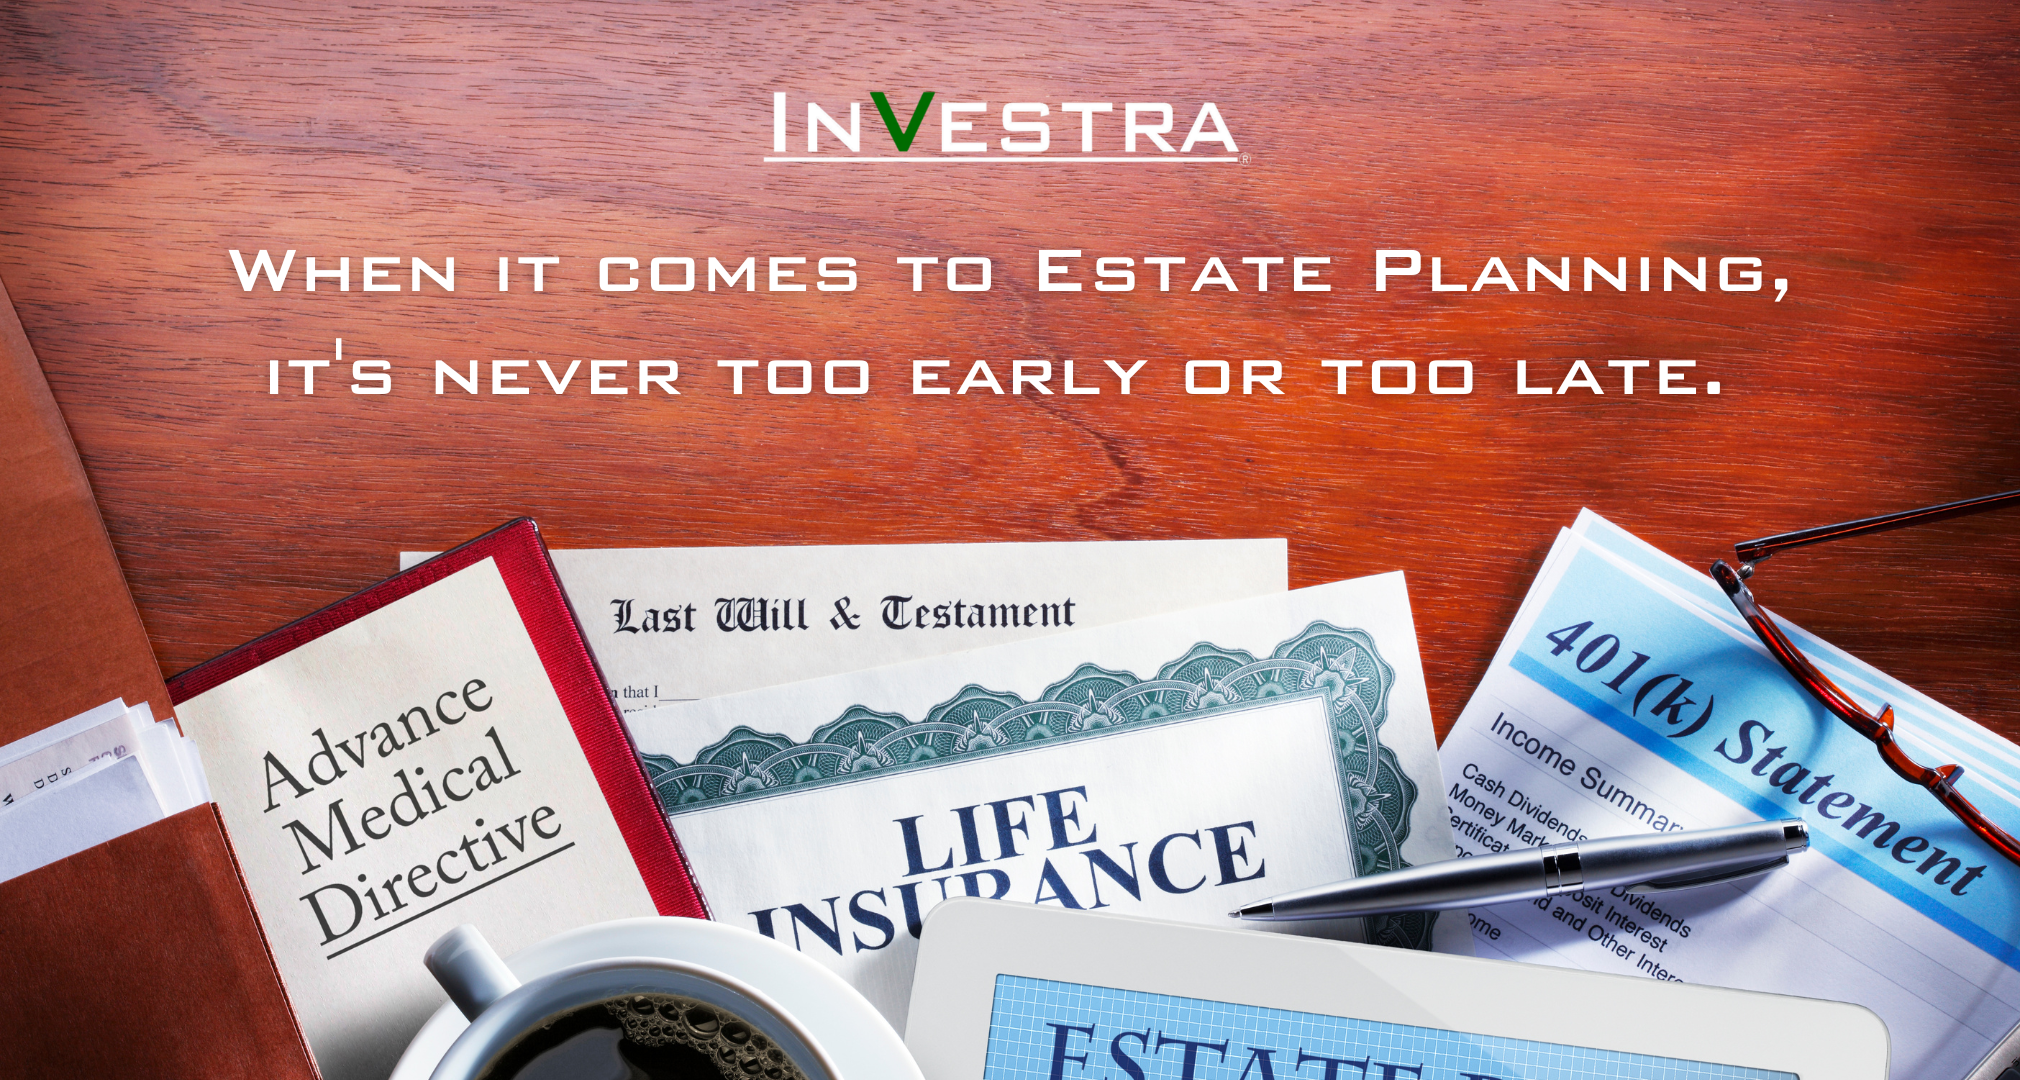 It’s Never Too EARLY Or Too LATE For Estate Planning